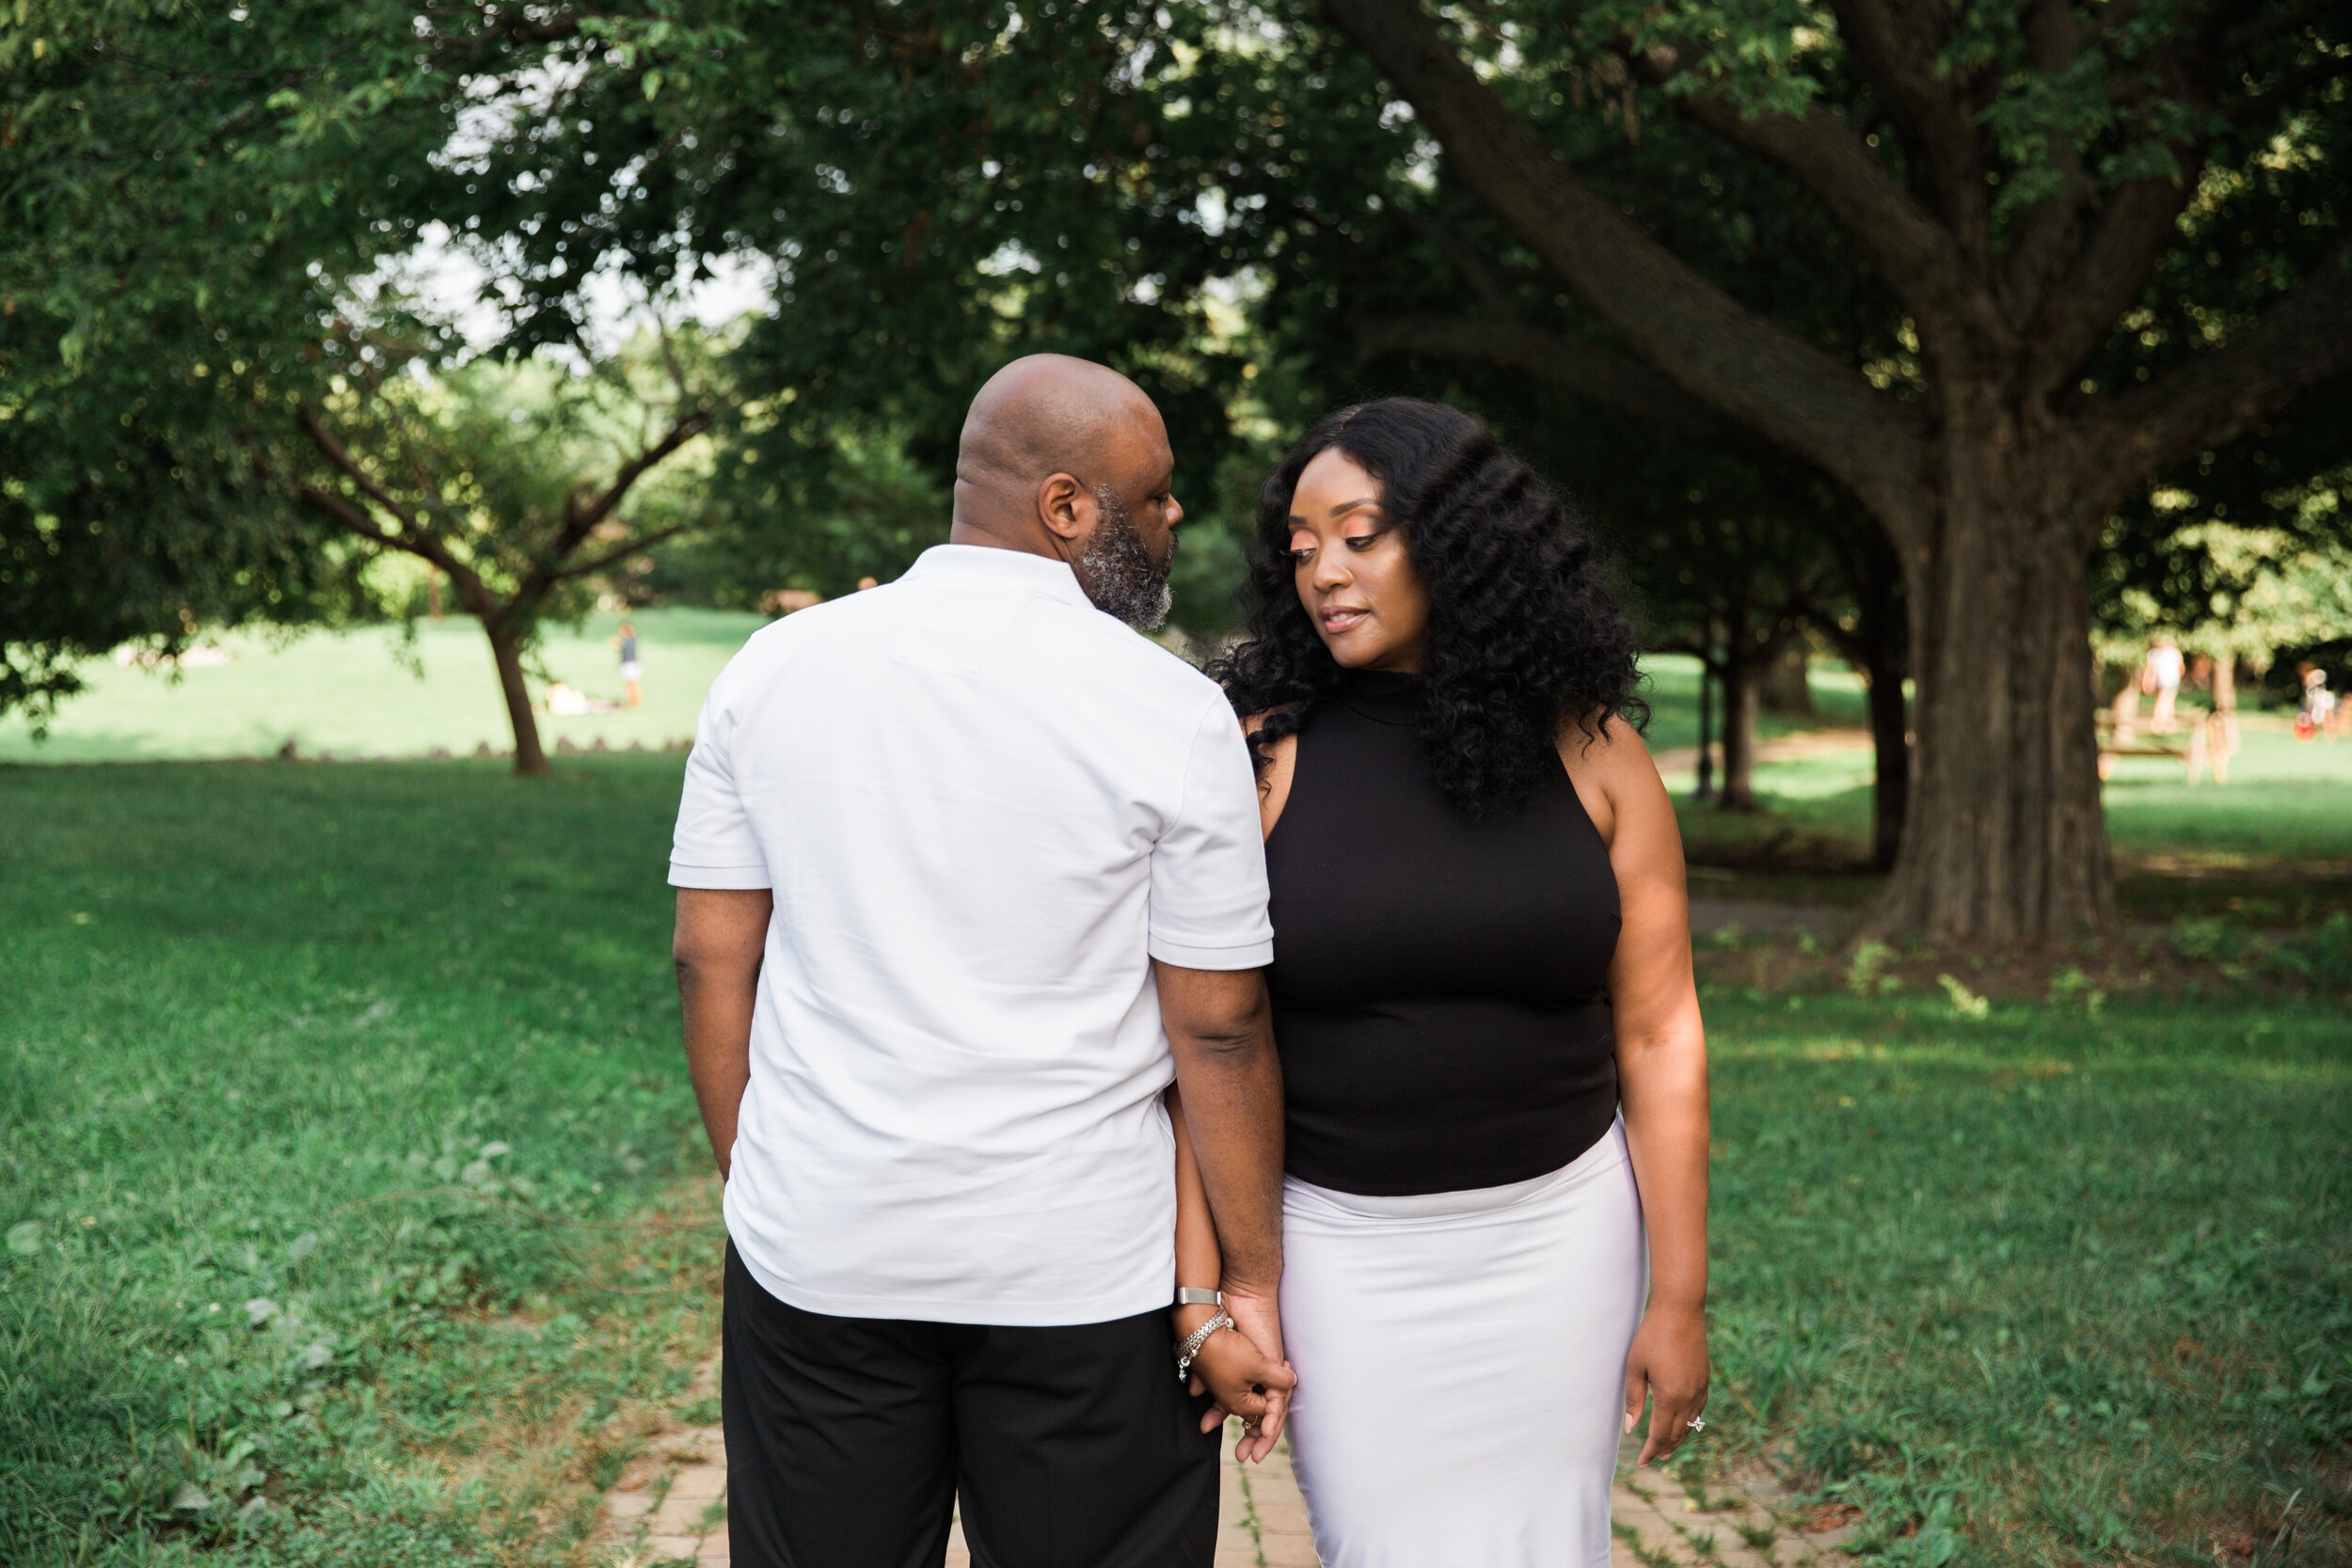 Patterson Park Engagement Session with Black Photographers Megapixels media in Baltimore Maryland (24 of 32).jpg